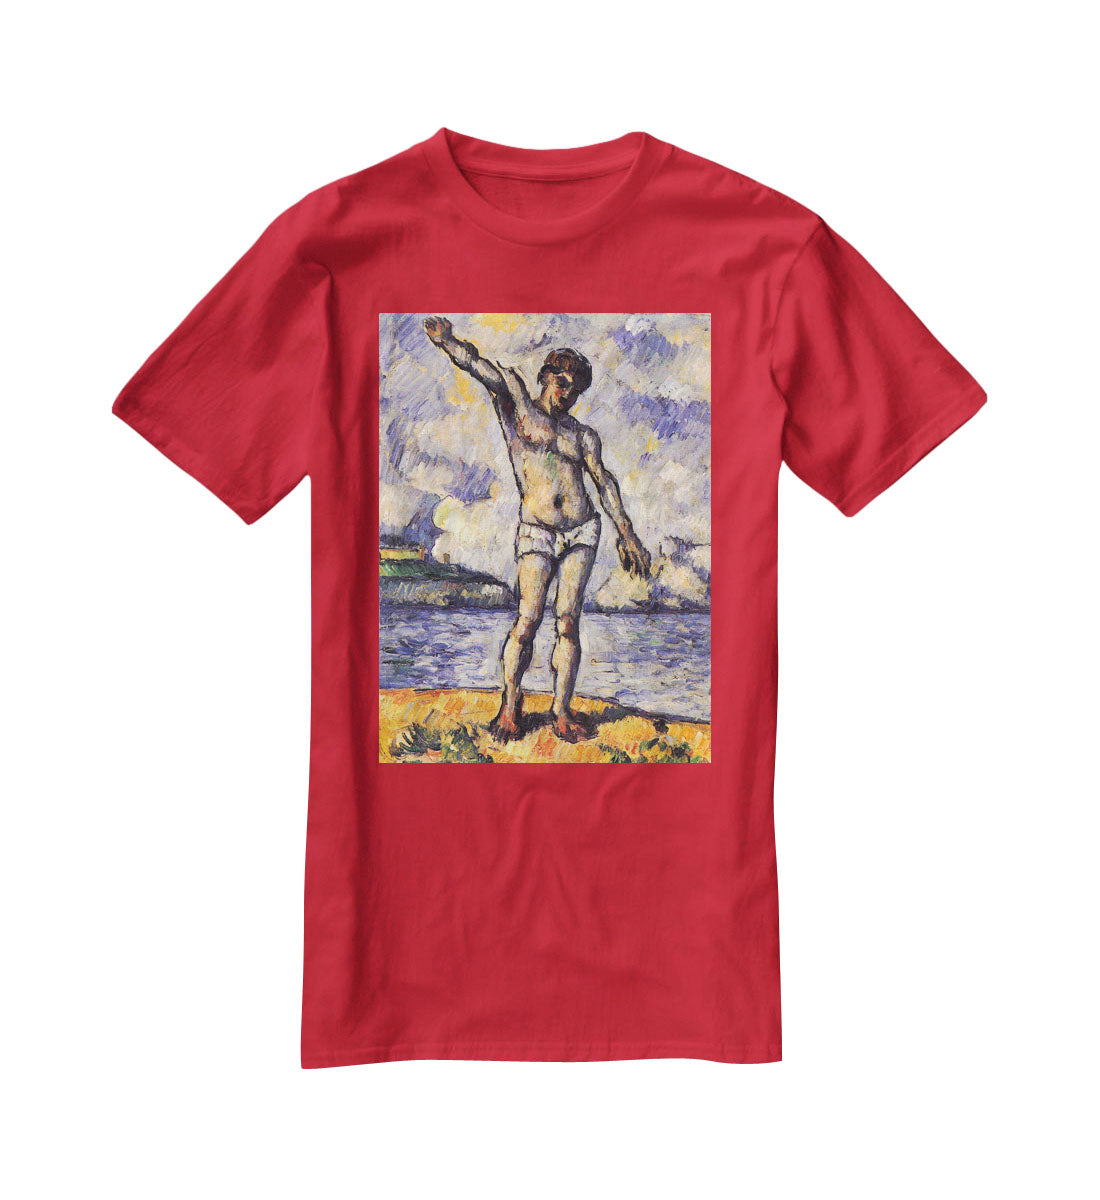 Swimmer with outstretched arms by Cezanne T-Shirt - Canvas Art Rocks - 4